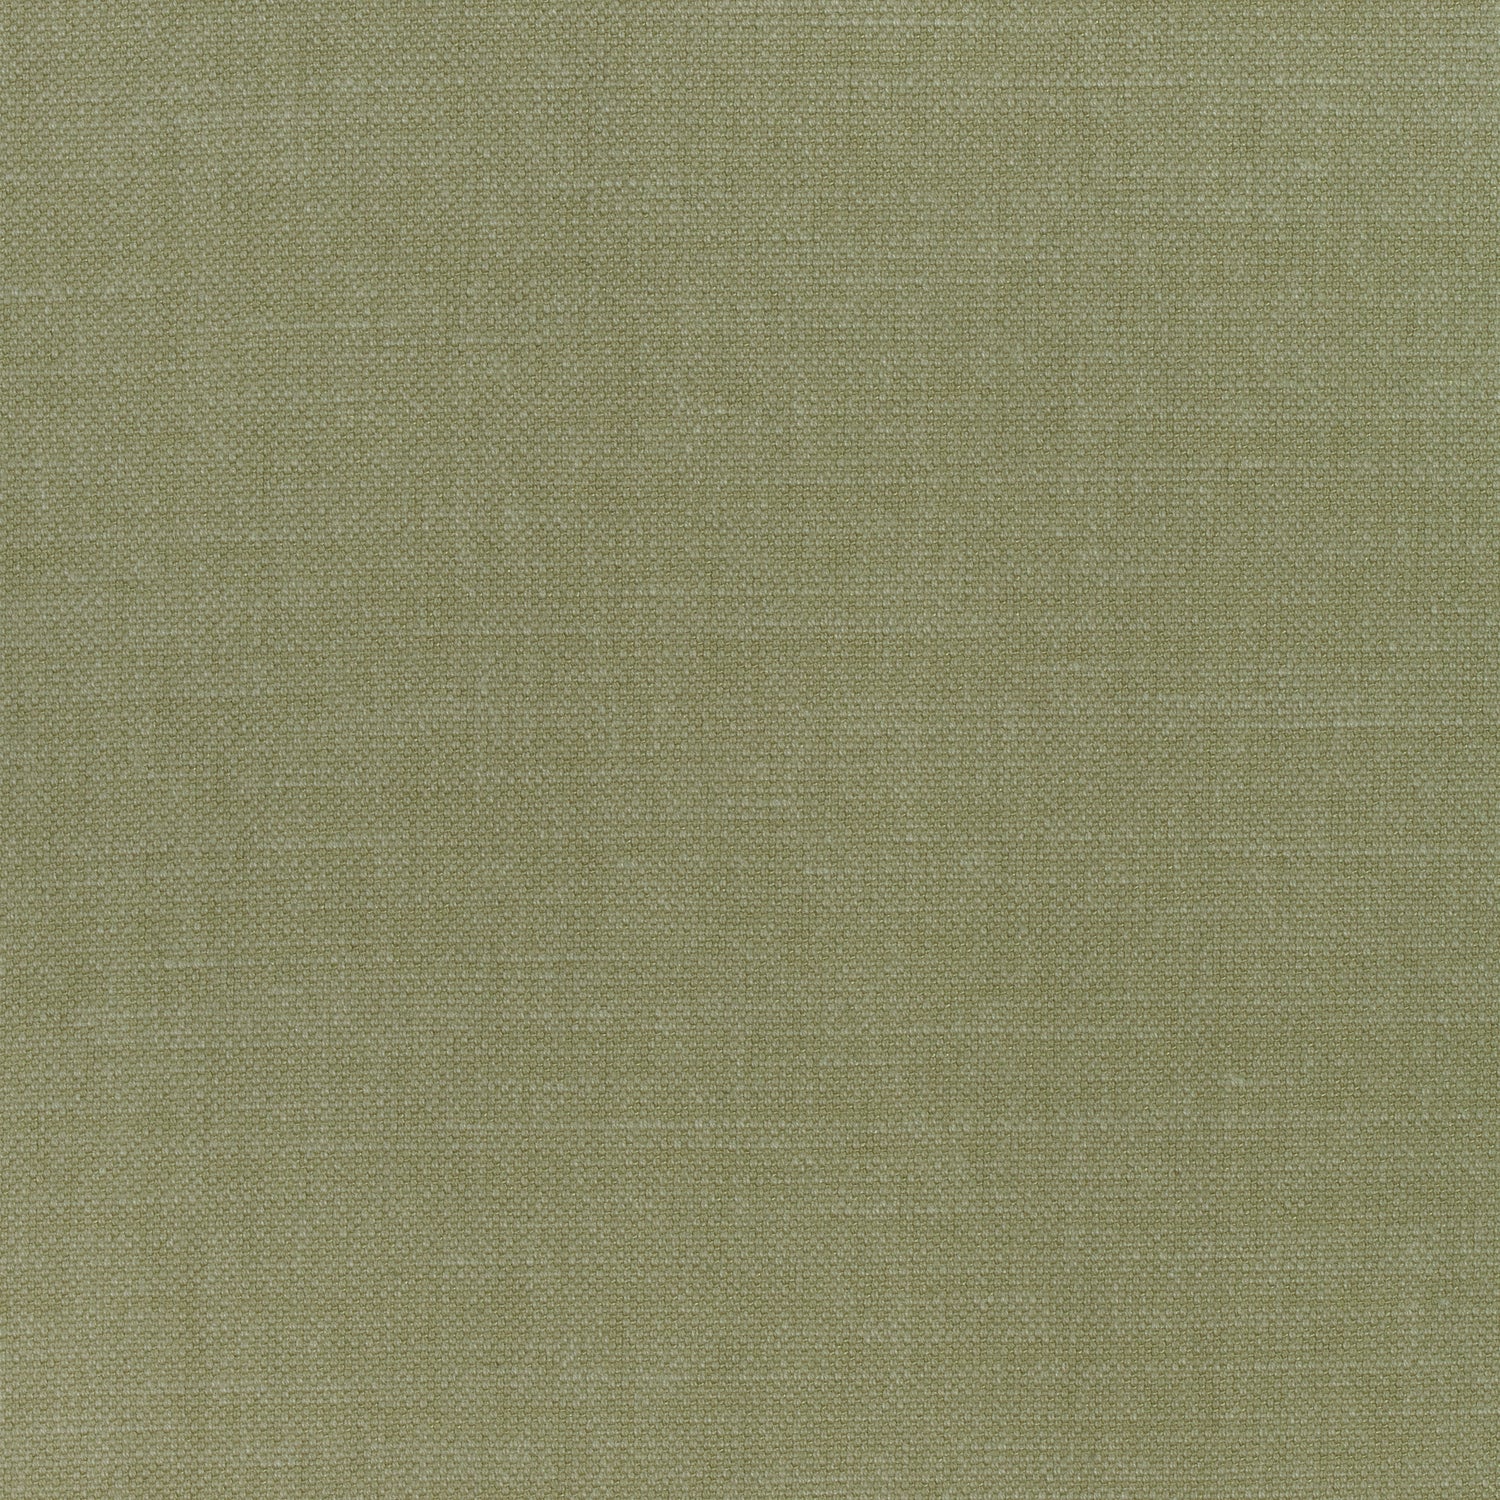 Prisma fabric in moss color - pattern number W70137 - by Thibaut in the Woven Resource Vol 12 Prisma Fabrics collection